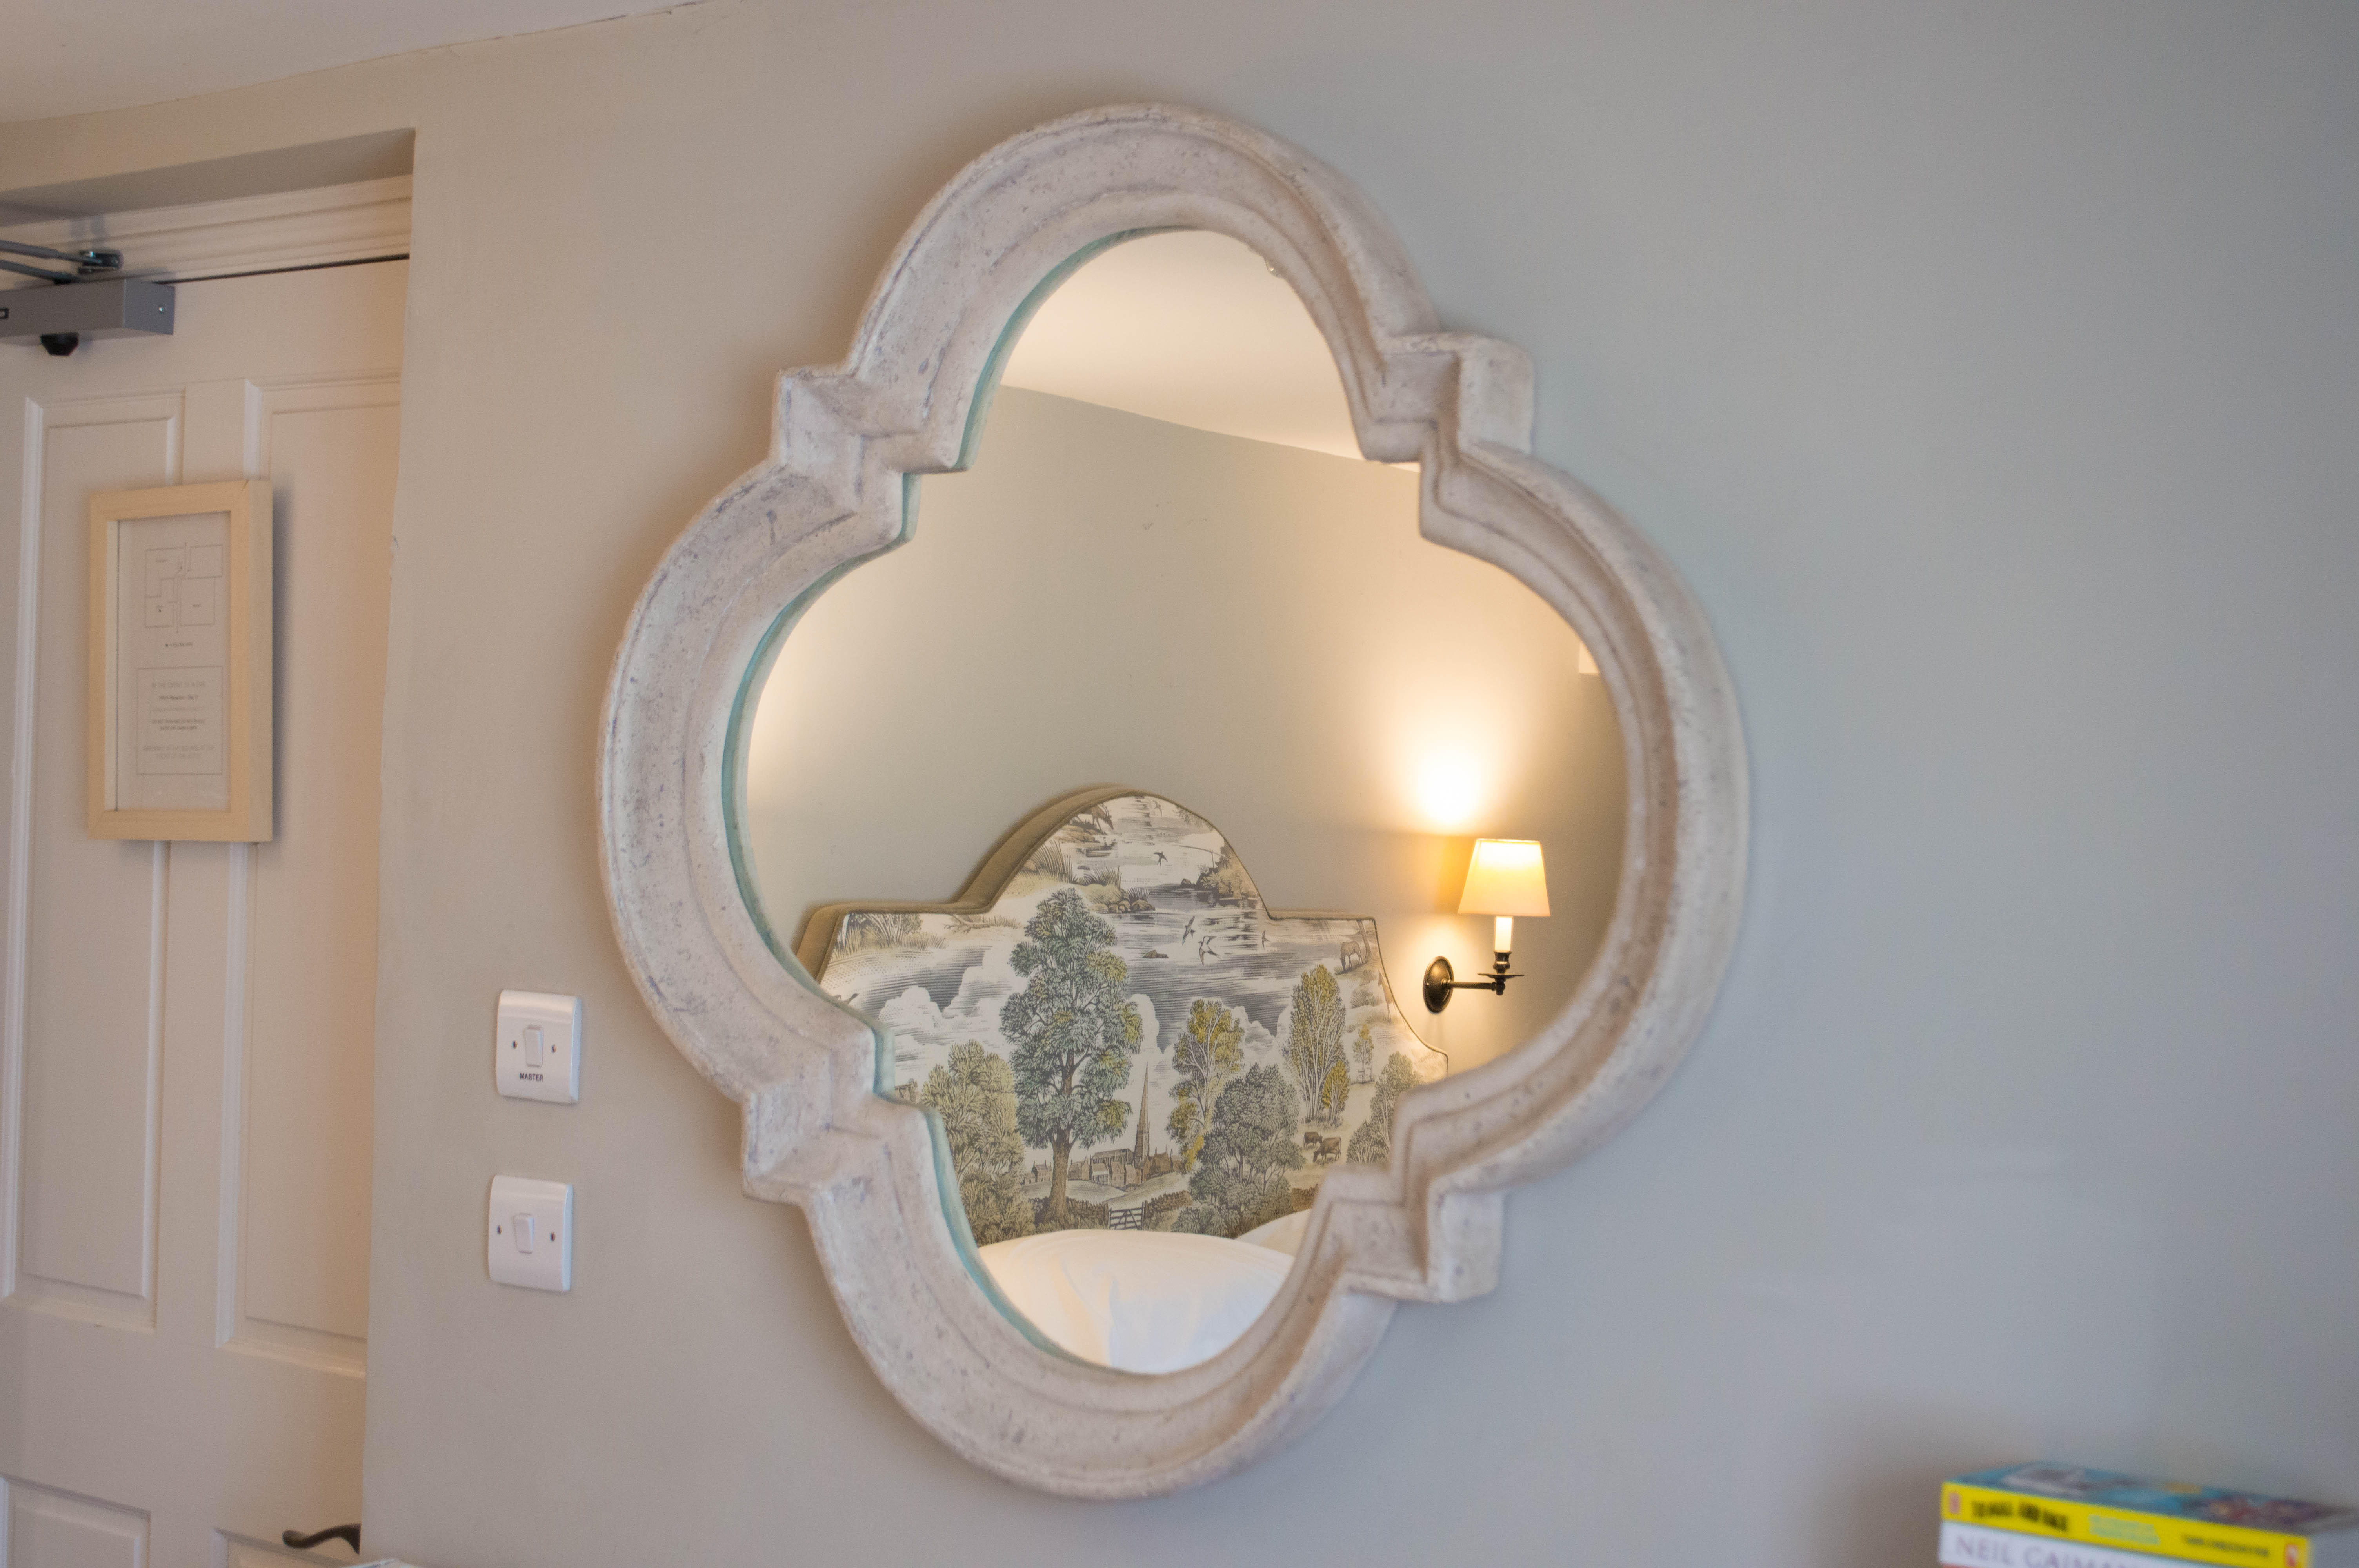 A decorative mirror in our room